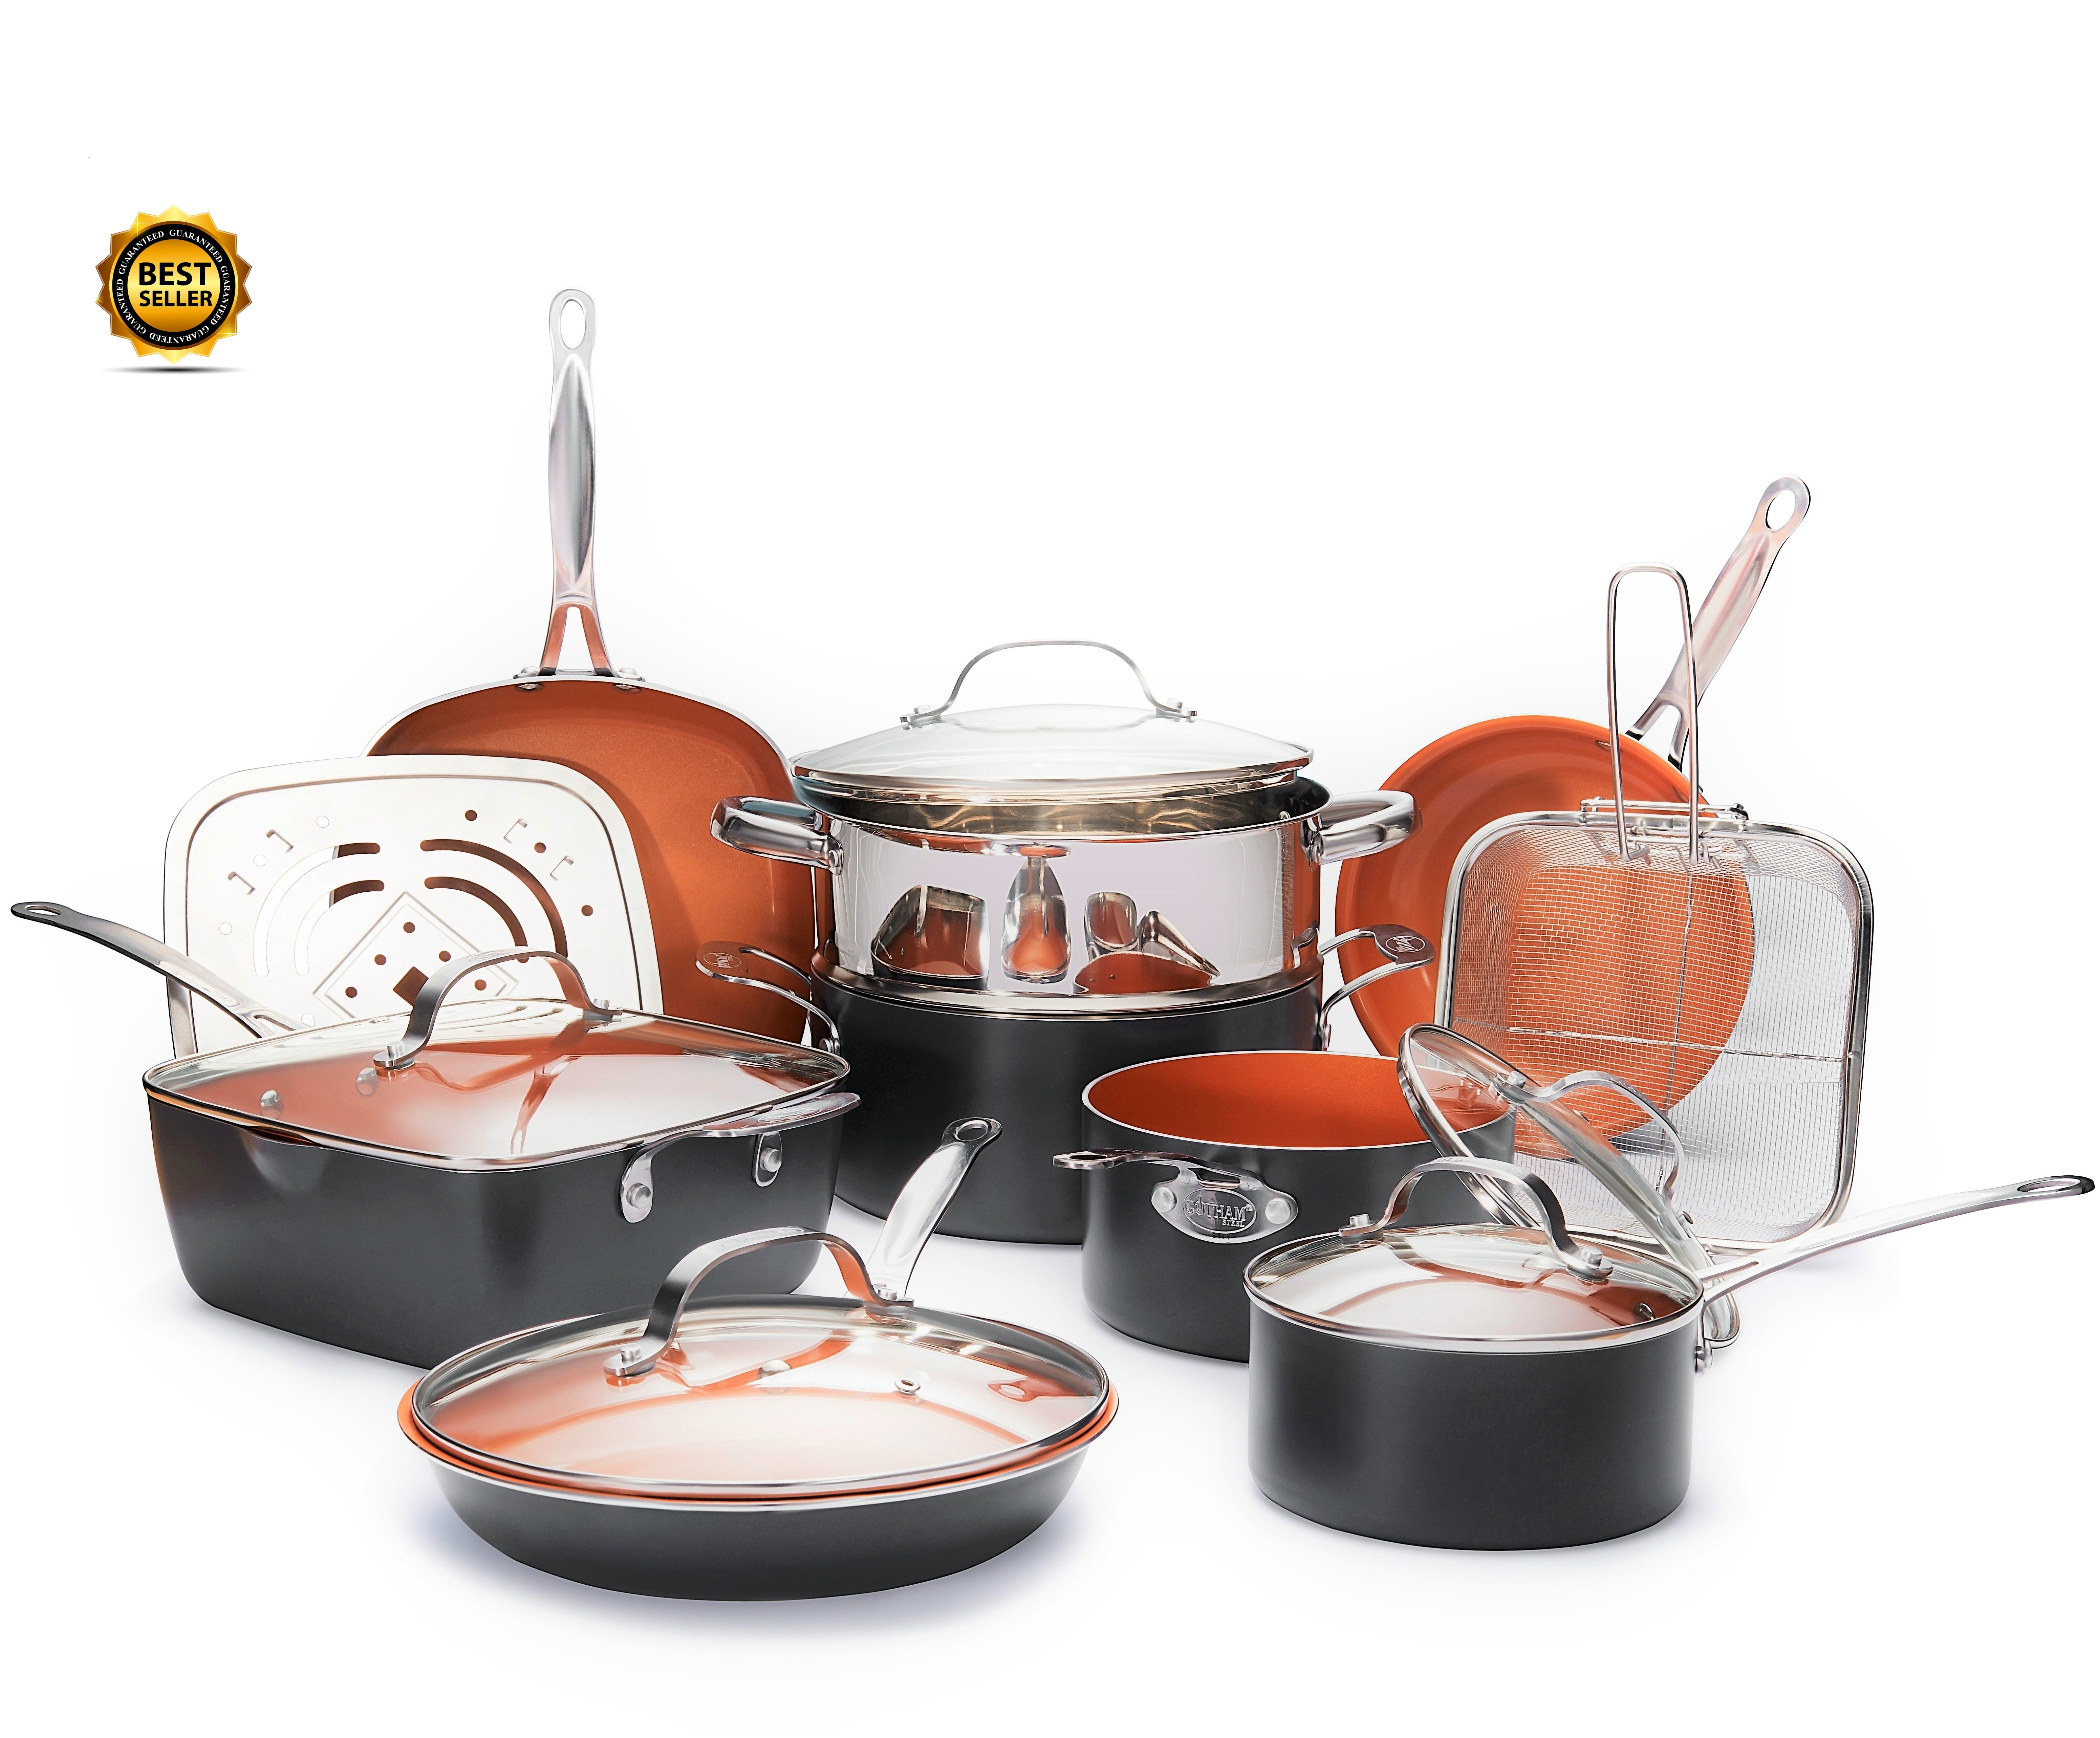 Details about   Gotham Steel 20 Piece All in One Kitchen Cookware Bakeware Set with Nonstick D 